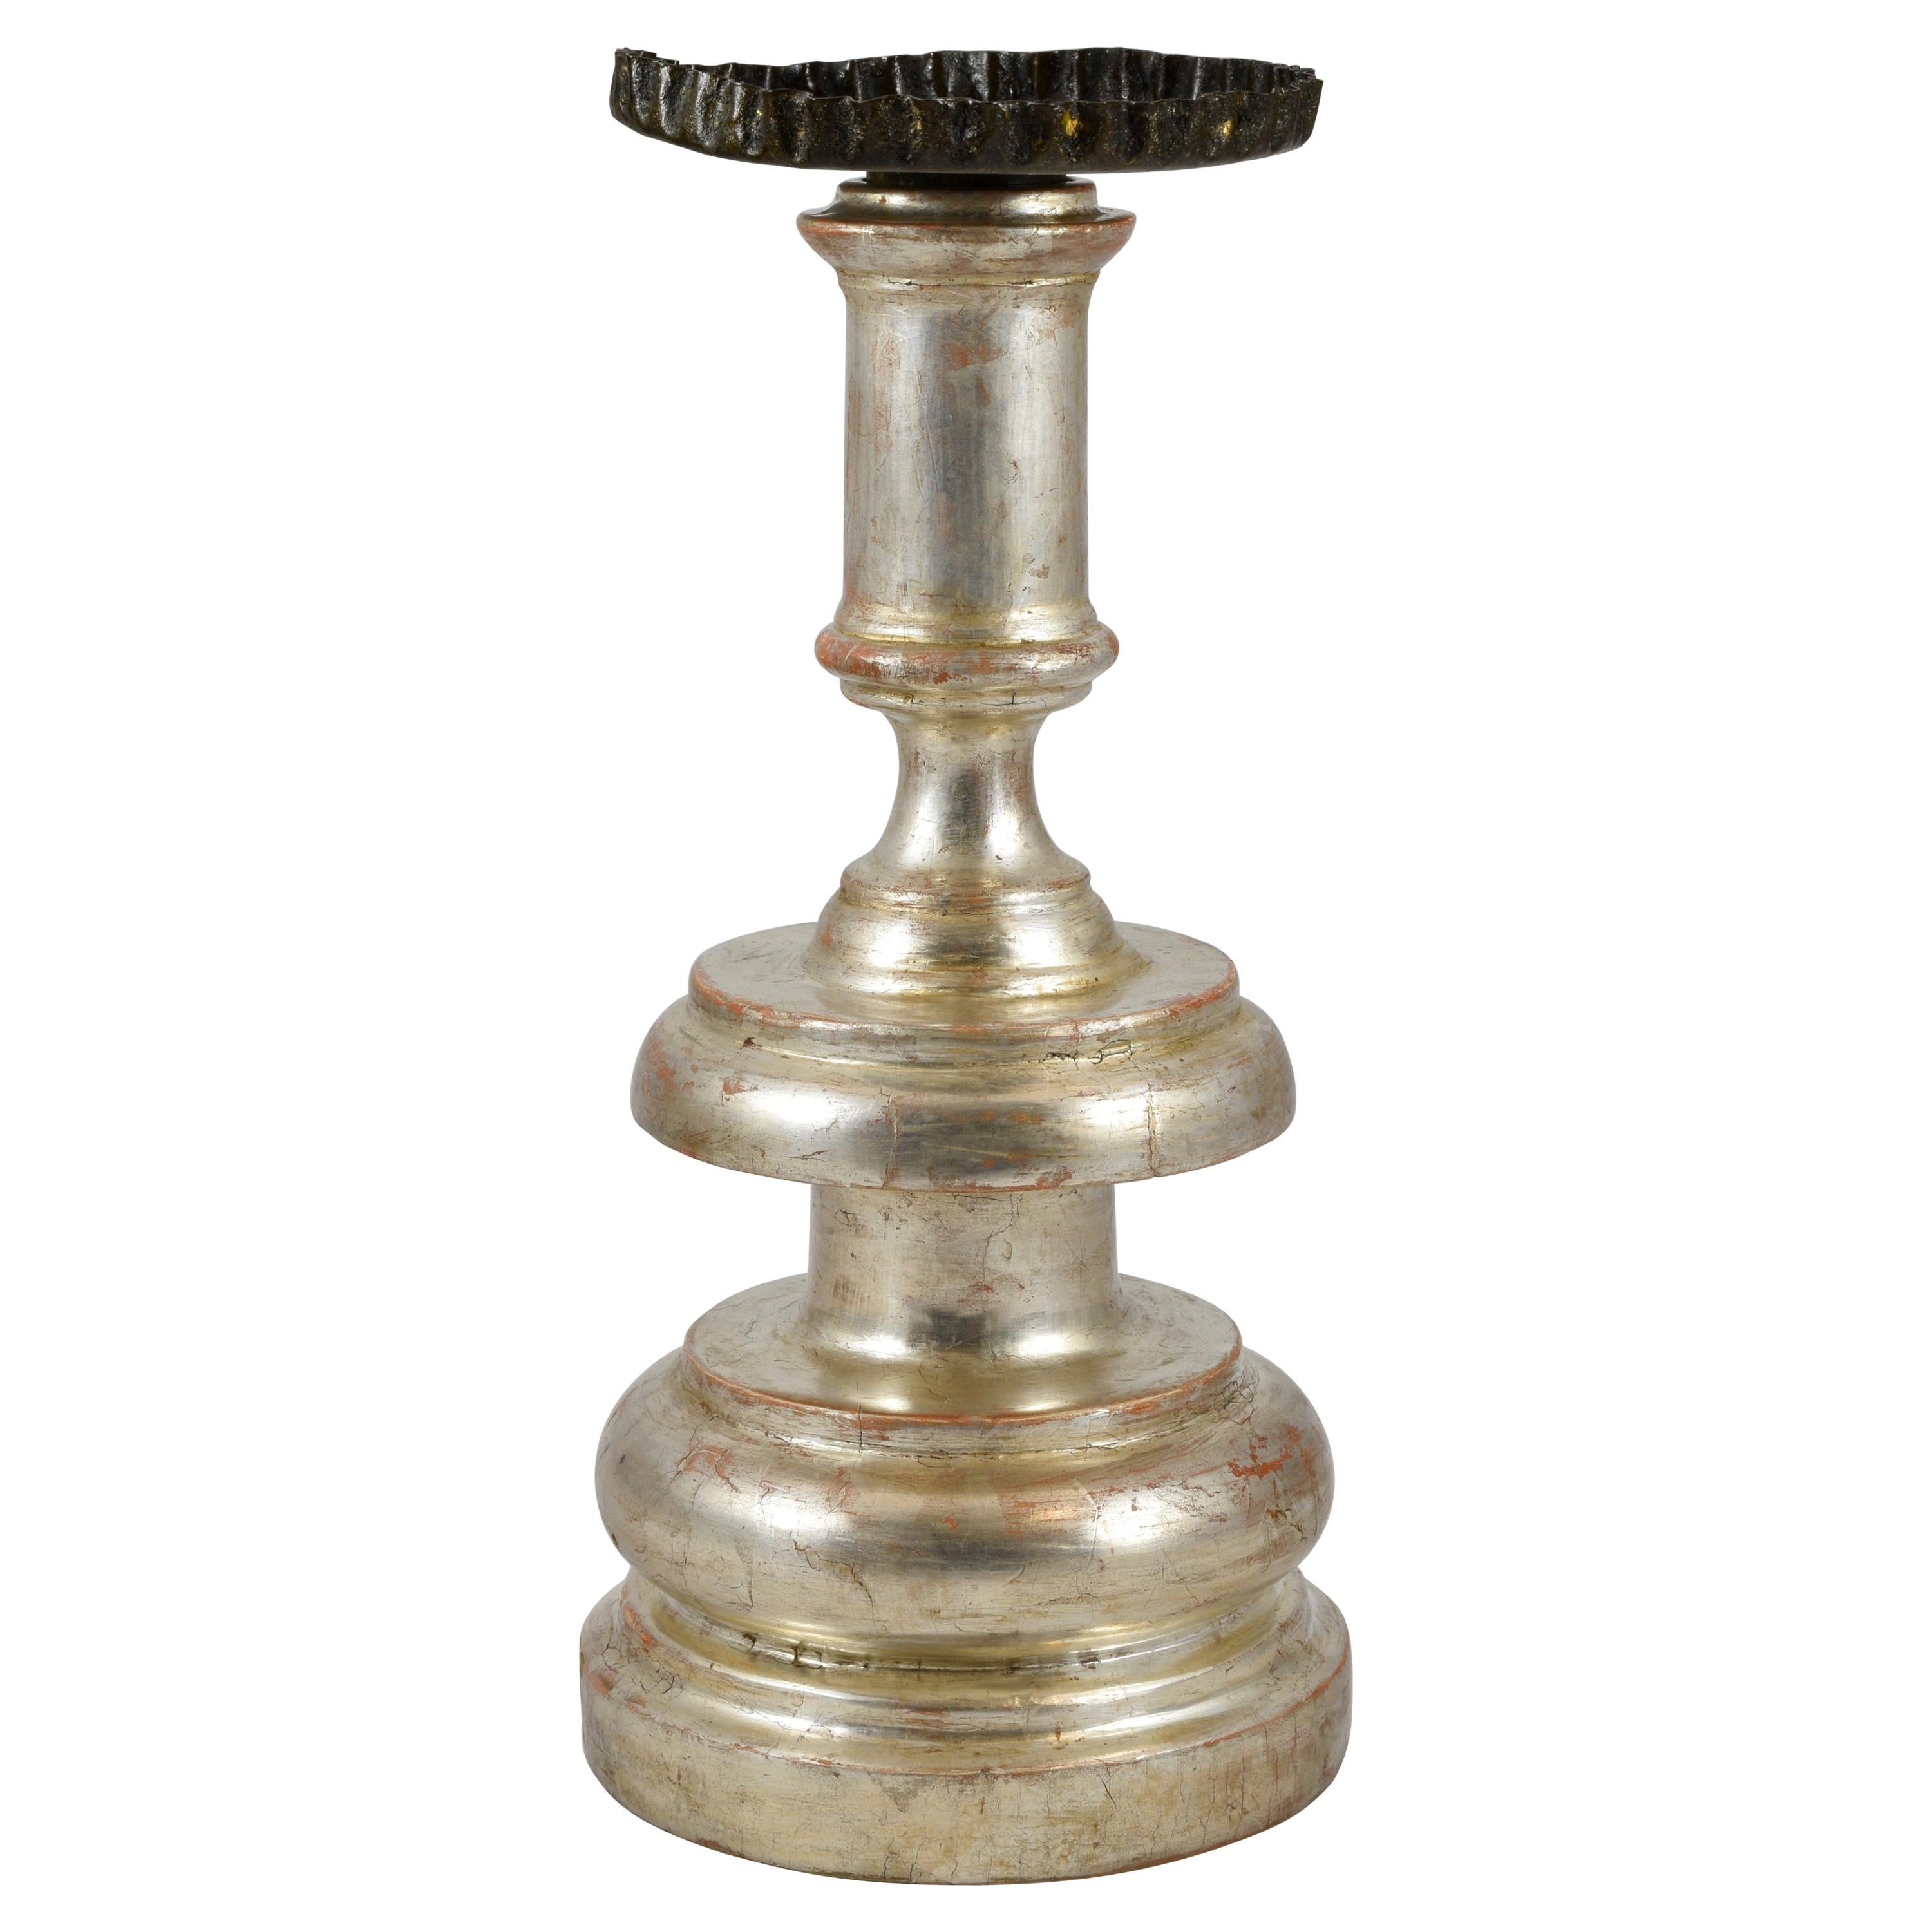 Florentine Candlestick in Lathed and Silvered Wood, Late 17th Century